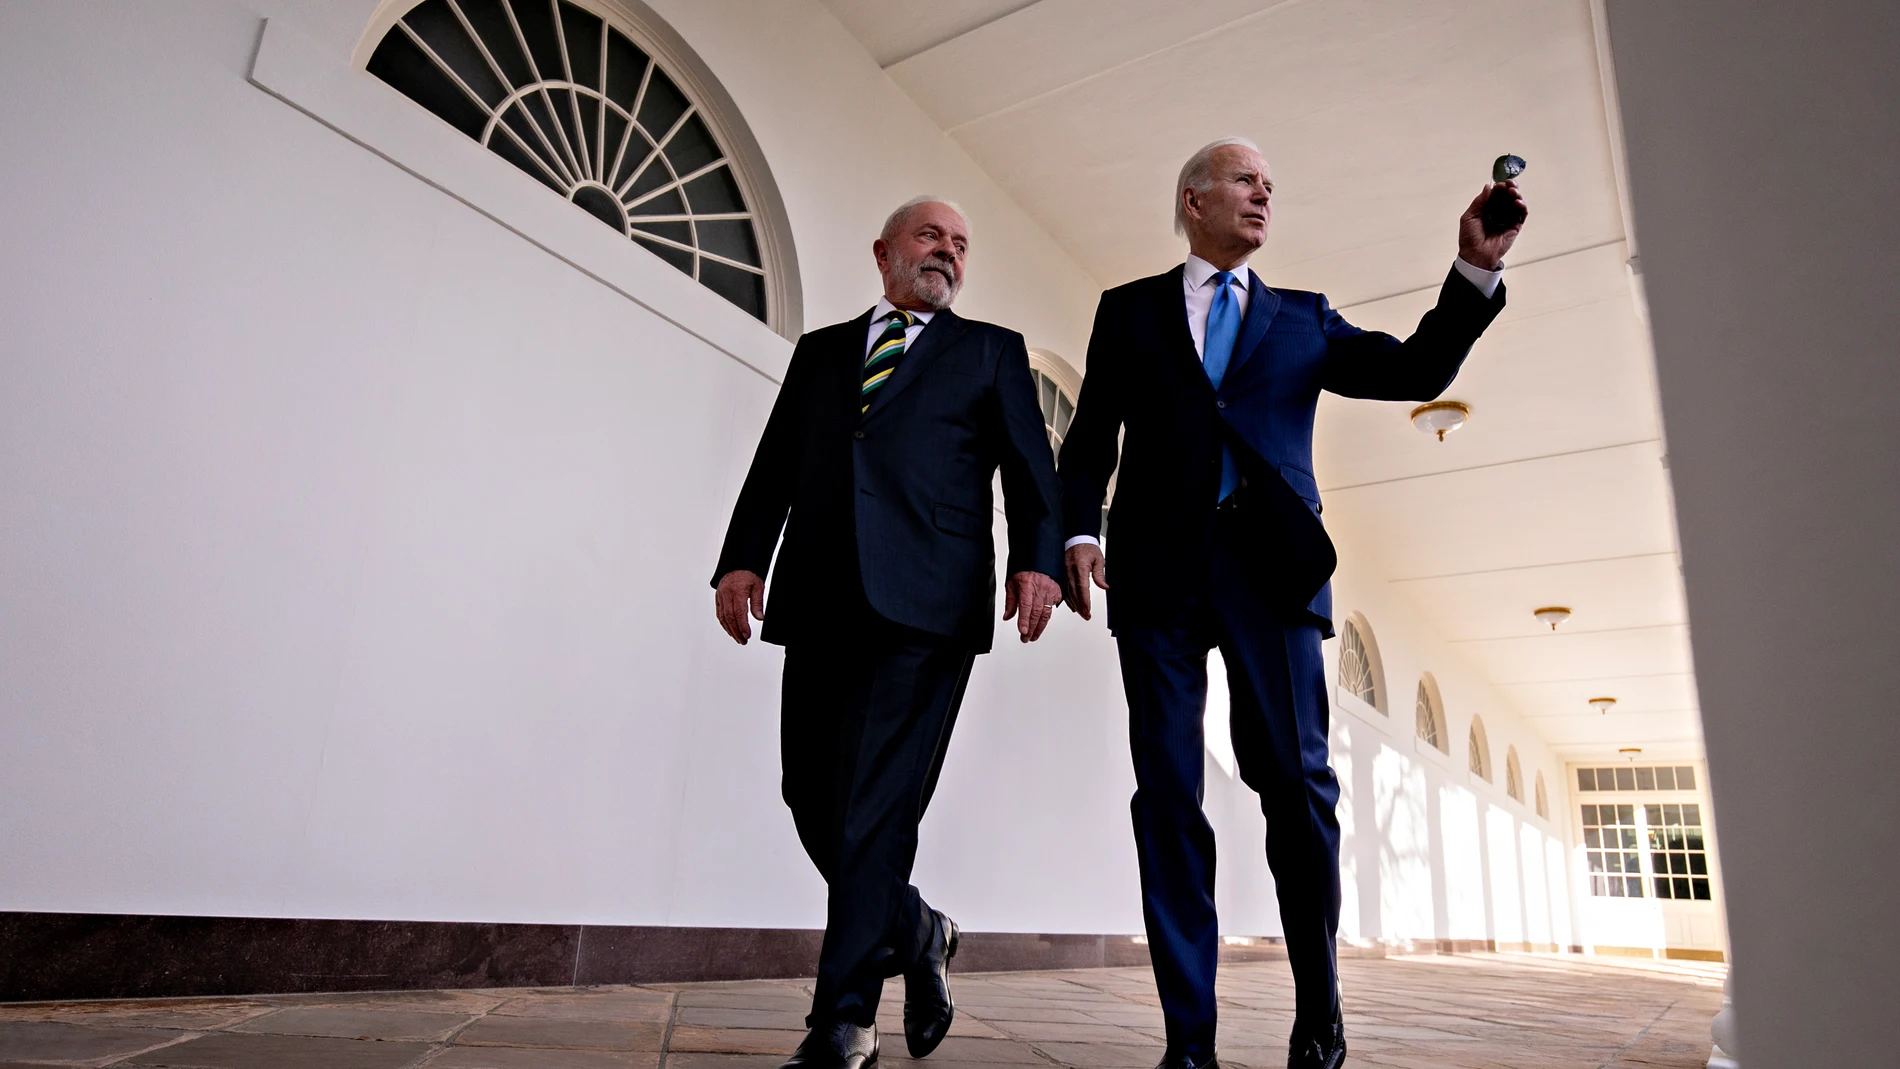 Washington (United States), 10/02/2023.- US President Joe Biden (R) and Brazil's president Luiz Inacio Lula da Silva walk through the Colonnade of the White House in Washington, DC, USA, 10 February 2023. Biden is hosting Lula in a show of support for Brazilian democracy, shaken last month by a right-wing insurrection akin to the invasion of the US Capitol in 2021. (Brasil, Estados Unidos) EFE/EPA/ANDREW HARRER / POOL